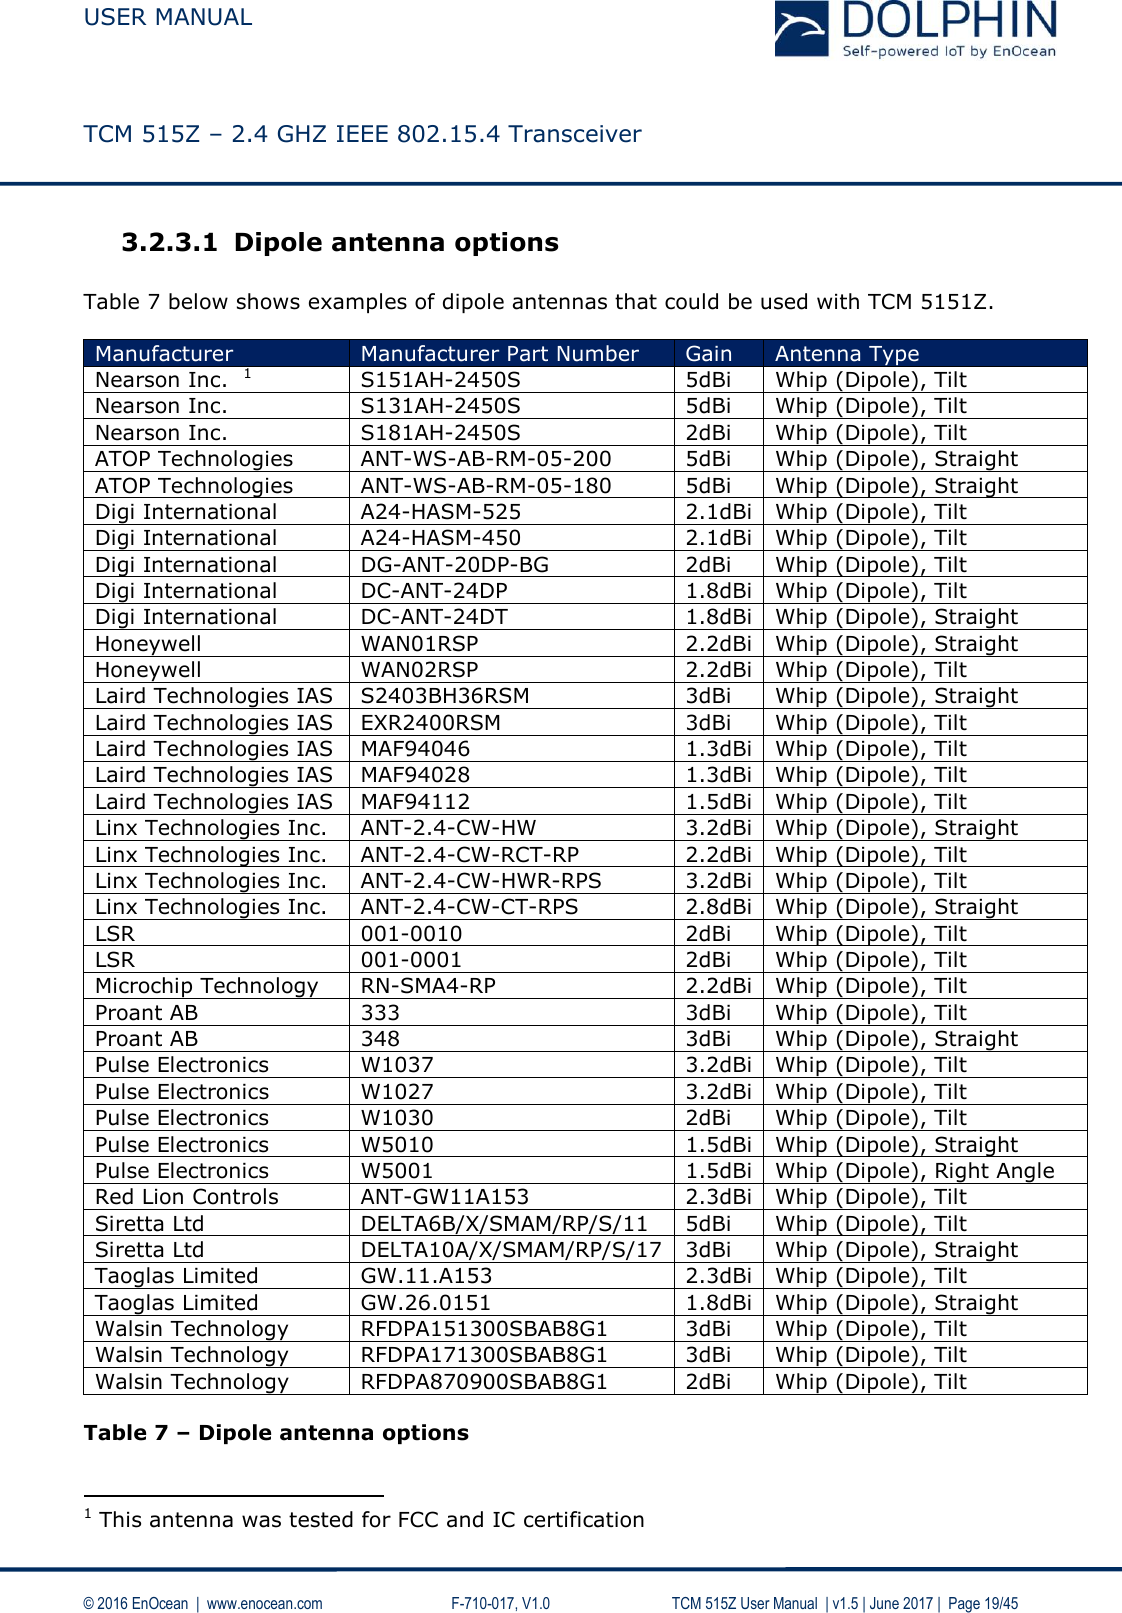  USER MANUAL    TCM 515Z – 2.4 GHZ IEEE 802.15.4 Transceiver   © 2016 EnOcean  |  www.enocean.com     F-710-017, V1.0        TCM 515Z User Manual  | v1.5 | June 2017 |  Page 19/45 3.2.3.1 Dipole antenna options  Table 7 below shows examples of dipole antennas that could be used with TCM 5151Z.  Manufacturer Manufacturer Part Number Gain Antenna Type Nearson Inc.  1 S151AH-2450S 5dBi Whip (Dipole), Tilt Nearson Inc. S131AH-2450S 5dBi Whip (Dipole), Tilt Nearson Inc. S181AH-2450S 2dBi Whip (Dipole), Tilt ATOP Technologies ANT-WS-AB-RM-05-200 5dBi Whip (Dipole), Straight ATOP Technologies ANT-WS-AB-RM-05-180 5dBi Whip (Dipole), Straight Digi International A24-HASM-525 2.1dBi Whip (Dipole), Tilt Digi International A24-HASM-450 2.1dBi Whip (Dipole), Tilt Digi International DG-ANT-20DP-BG 2dBi Whip (Dipole), Tilt Digi International DC-ANT-24DP 1.8dBi Whip (Dipole), Tilt Digi International DC-ANT-24DT 1.8dBi Whip (Dipole), Straight Honeywell  WAN01RSP 2.2dBi Whip (Dipole), Straight Honeywell  WAN02RSP 2.2dBi Whip (Dipole), Tilt Laird Technologies IAS S2403BH36RSM 3dBi Whip (Dipole), Straight Laird Technologies IAS EXR2400RSM 3dBi Whip (Dipole), Tilt Laird Technologies IAS MAF94046 1.3dBi Whip (Dipole), Tilt Laird Technologies IAS MAF94028 1.3dBi Whip (Dipole), Tilt Laird Technologies IAS MAF94112 1.5dBi Whip (Dipole), Tilt Linx Technologies Inc. ANT-2.4-CW-HW 3.2dBi Whip (Dipole), Straight Linx Technologies Inc. ANT-2.4-CW-RCT-RP 2.2dBi Whip (Dipole), Tilt Linx Technologies Inc. ANT-2.4-CW-HWR-RPS 3.2dBi Whip (Dipole), Tilt Linx Technologies Inc. ANT-2.4-CW-CT-RPS 2.8dBi Whip (Dipole), Straight LSR 001-0010 2dBi Whip (Dipole), Tilt LSR 001-0001 2dBi Whip (Dipole), Tilt Microchip Technology RN-SMA4-RP 2.2dBi Whip (Dipole), Tilt Proant AB 333 3dBi Whip (Dipole), Tilt Proant AB 348 3dBi Whip (Dipole), Straight Pulse Electronics  W1037 3.2dBi Whip (Dipole), Tilt Pulse Electronics W1027 3.2dBi Whip (Dipole), Tilt Pulse Electronics W1030 2dBi Whip (Dipole), Tilt Pulse Electronics  W5010 1.5dBi Whip (Dipole), Straight Pulse Electronics  W5001 1.5dBi Whip (Dipole), Right Angle Red Lion Controls ANT-GW11A153 2.3dBi Whip (Dipole), Tilt Siretta Ltd DELTA6B/X/SMAM/RP/S/11 5dBi Whip (Dipole), Tilt Siretta Ltd DELTA10A/X/SMAM/RP/S/17 3dBi Whip (Dipole), Straight Taoglas Limited GW.11.A153 2.3dBi Whip (Dipole), Tilt Taoglas Limited GW.26.0151 1.8dBi Whip (Dipole), Straight Walsin Technology  RFDPA151300SBAB8G1 3dBi Whip (Dipole), Tilt Walsin Technology  RFDPA171300SBAB8G1 3dBi Whip (Dipole), Tilt Walsin Technology RFDPA870900SBAB8G1 2dBi Whip (Dipole), Tilt  Table 7 – Dipole antenna options                                             1 This antenna was tested for FCC and IC certification 